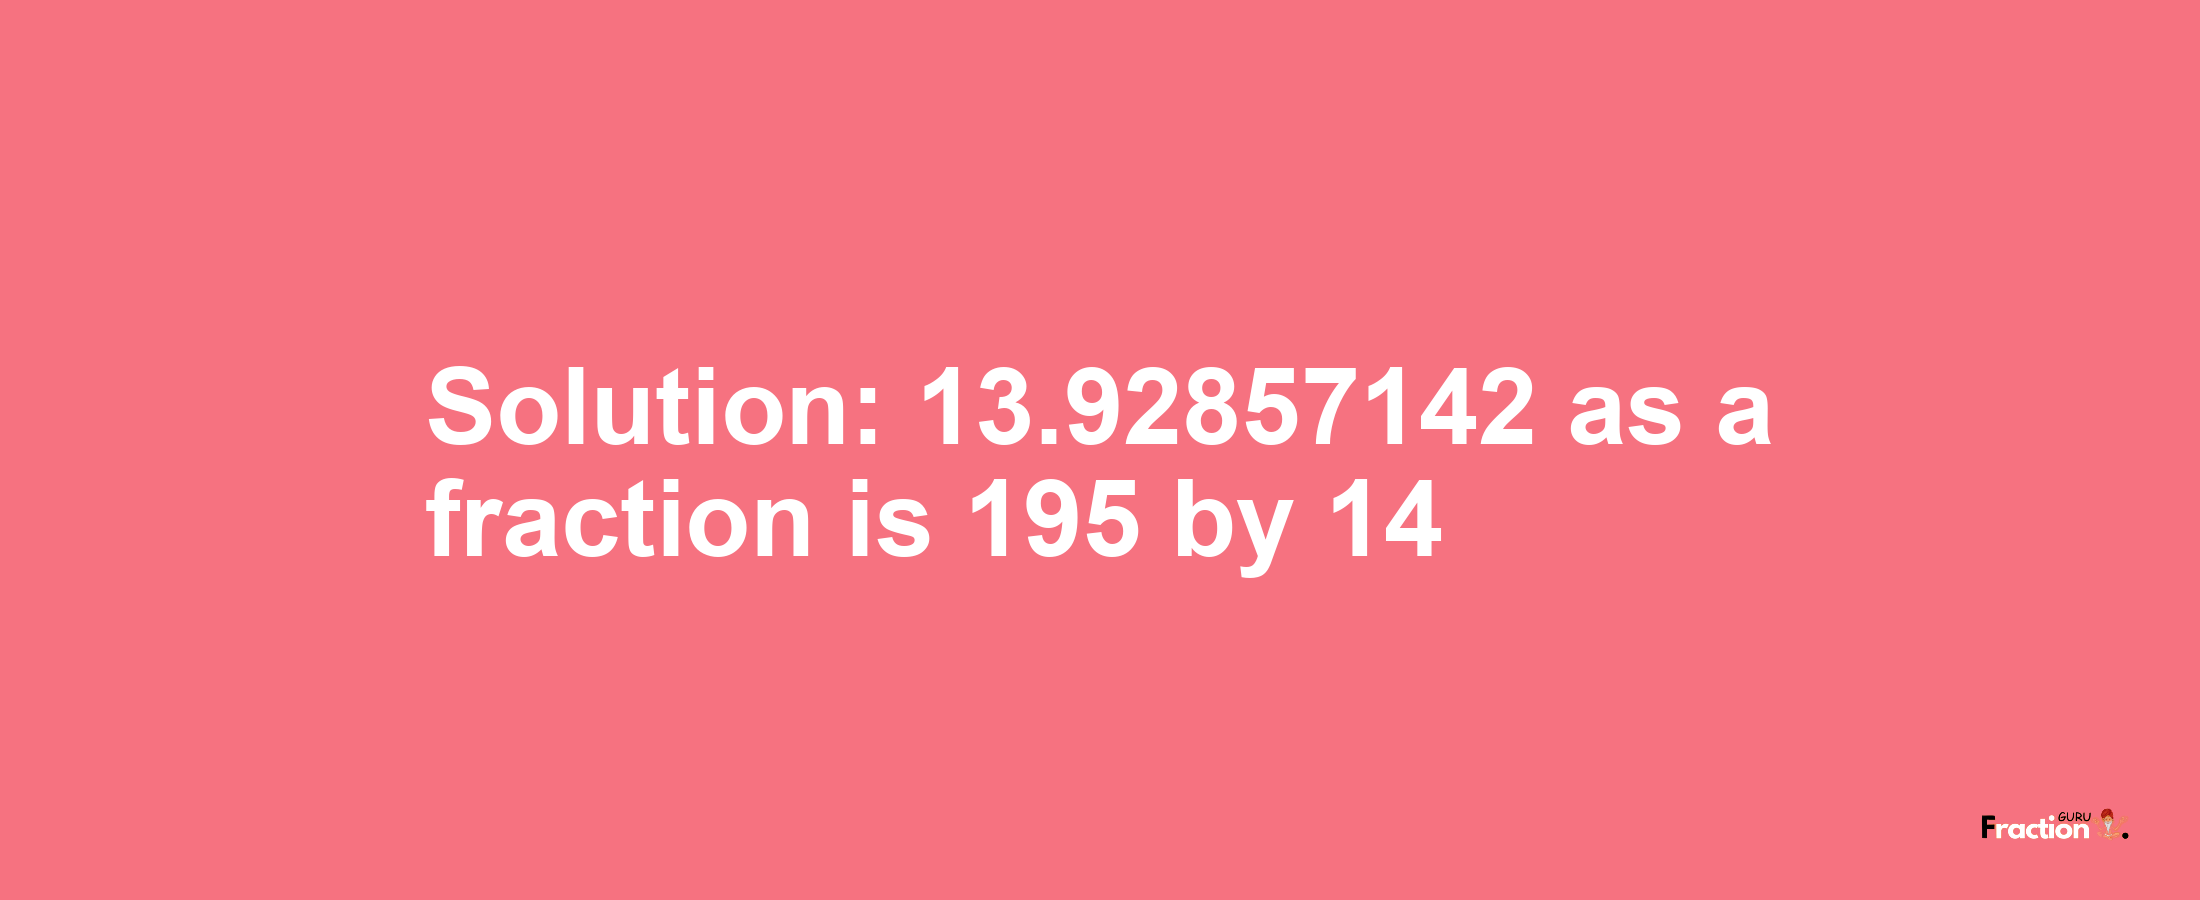 Solution:13.92857142 as a fraction is 195/14